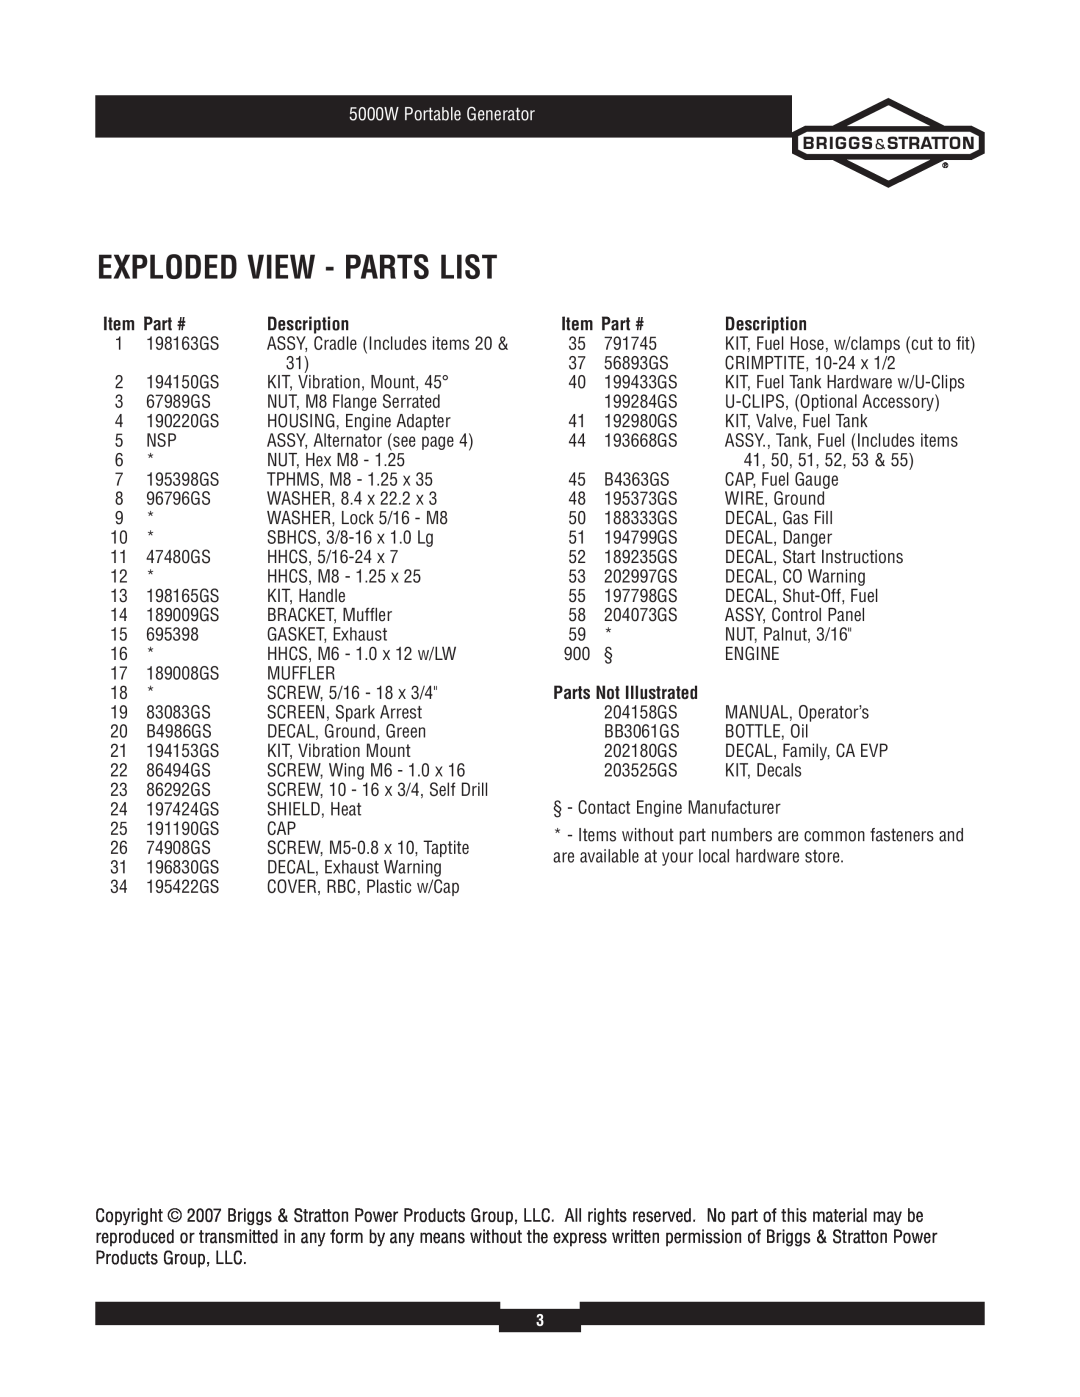 Briggs & Stratton 30361 manual Exploded View - Parts List, Description, Parts Not Illustrated, 5000W Portable Generator 